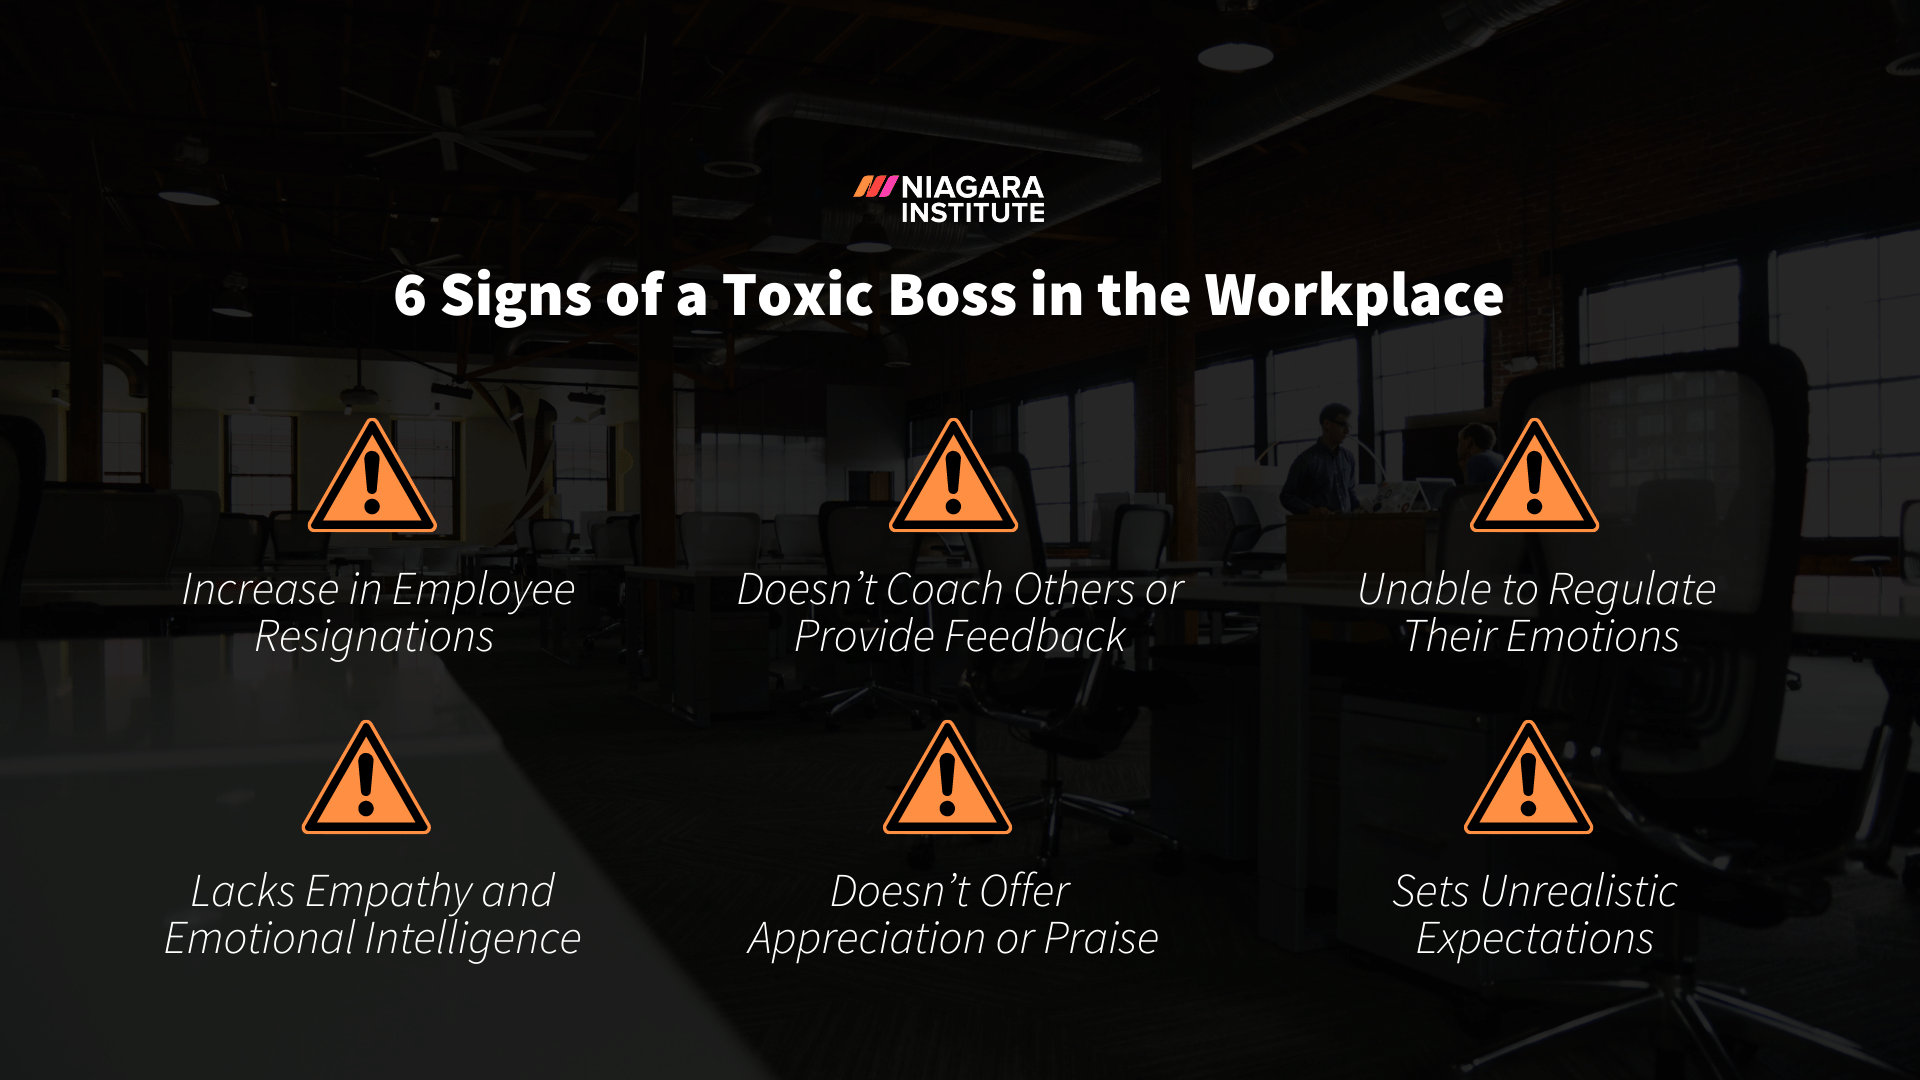 Article: How to handle a toxic boss — People Matters